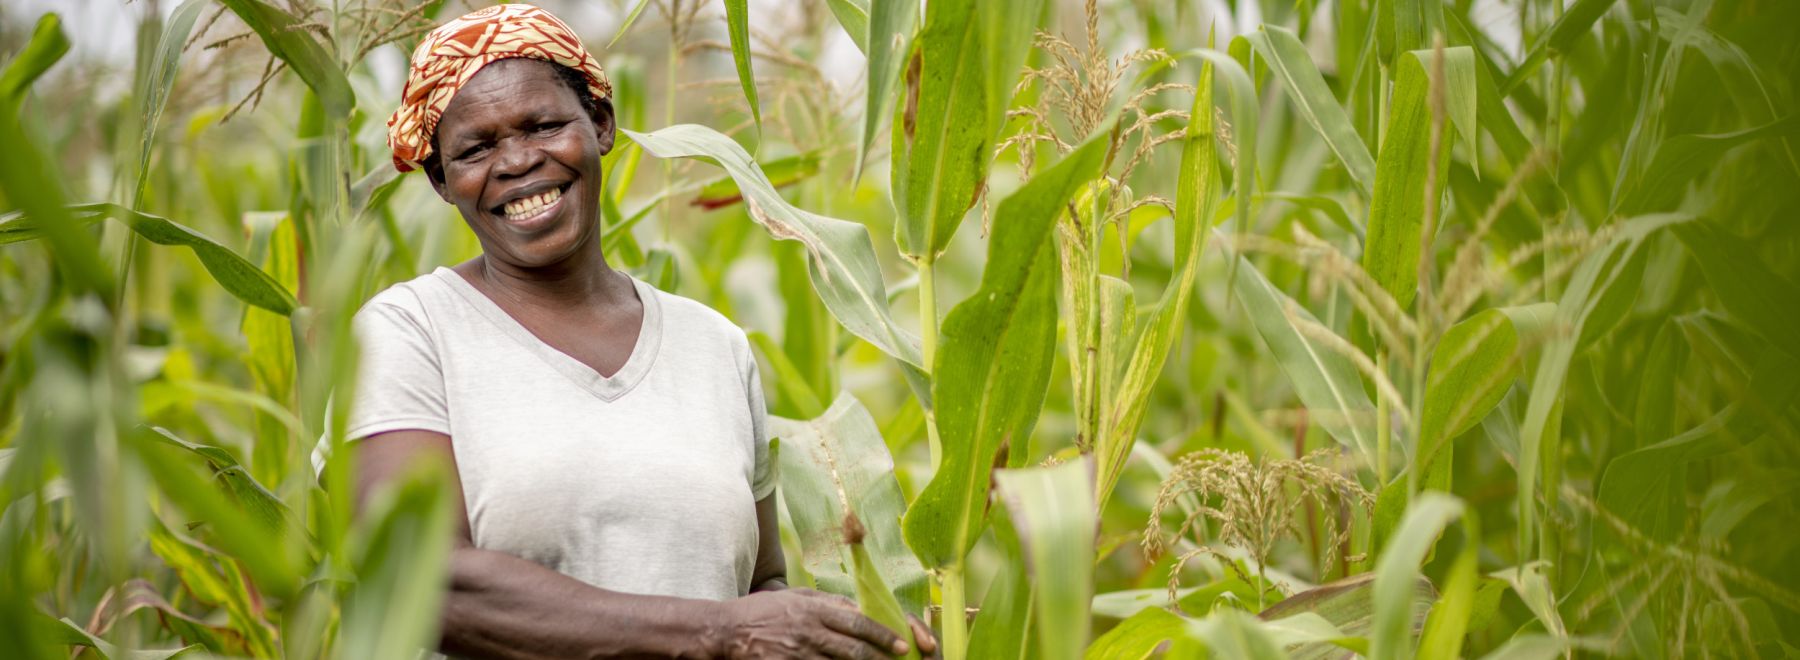 Woman farmer and her maize crops